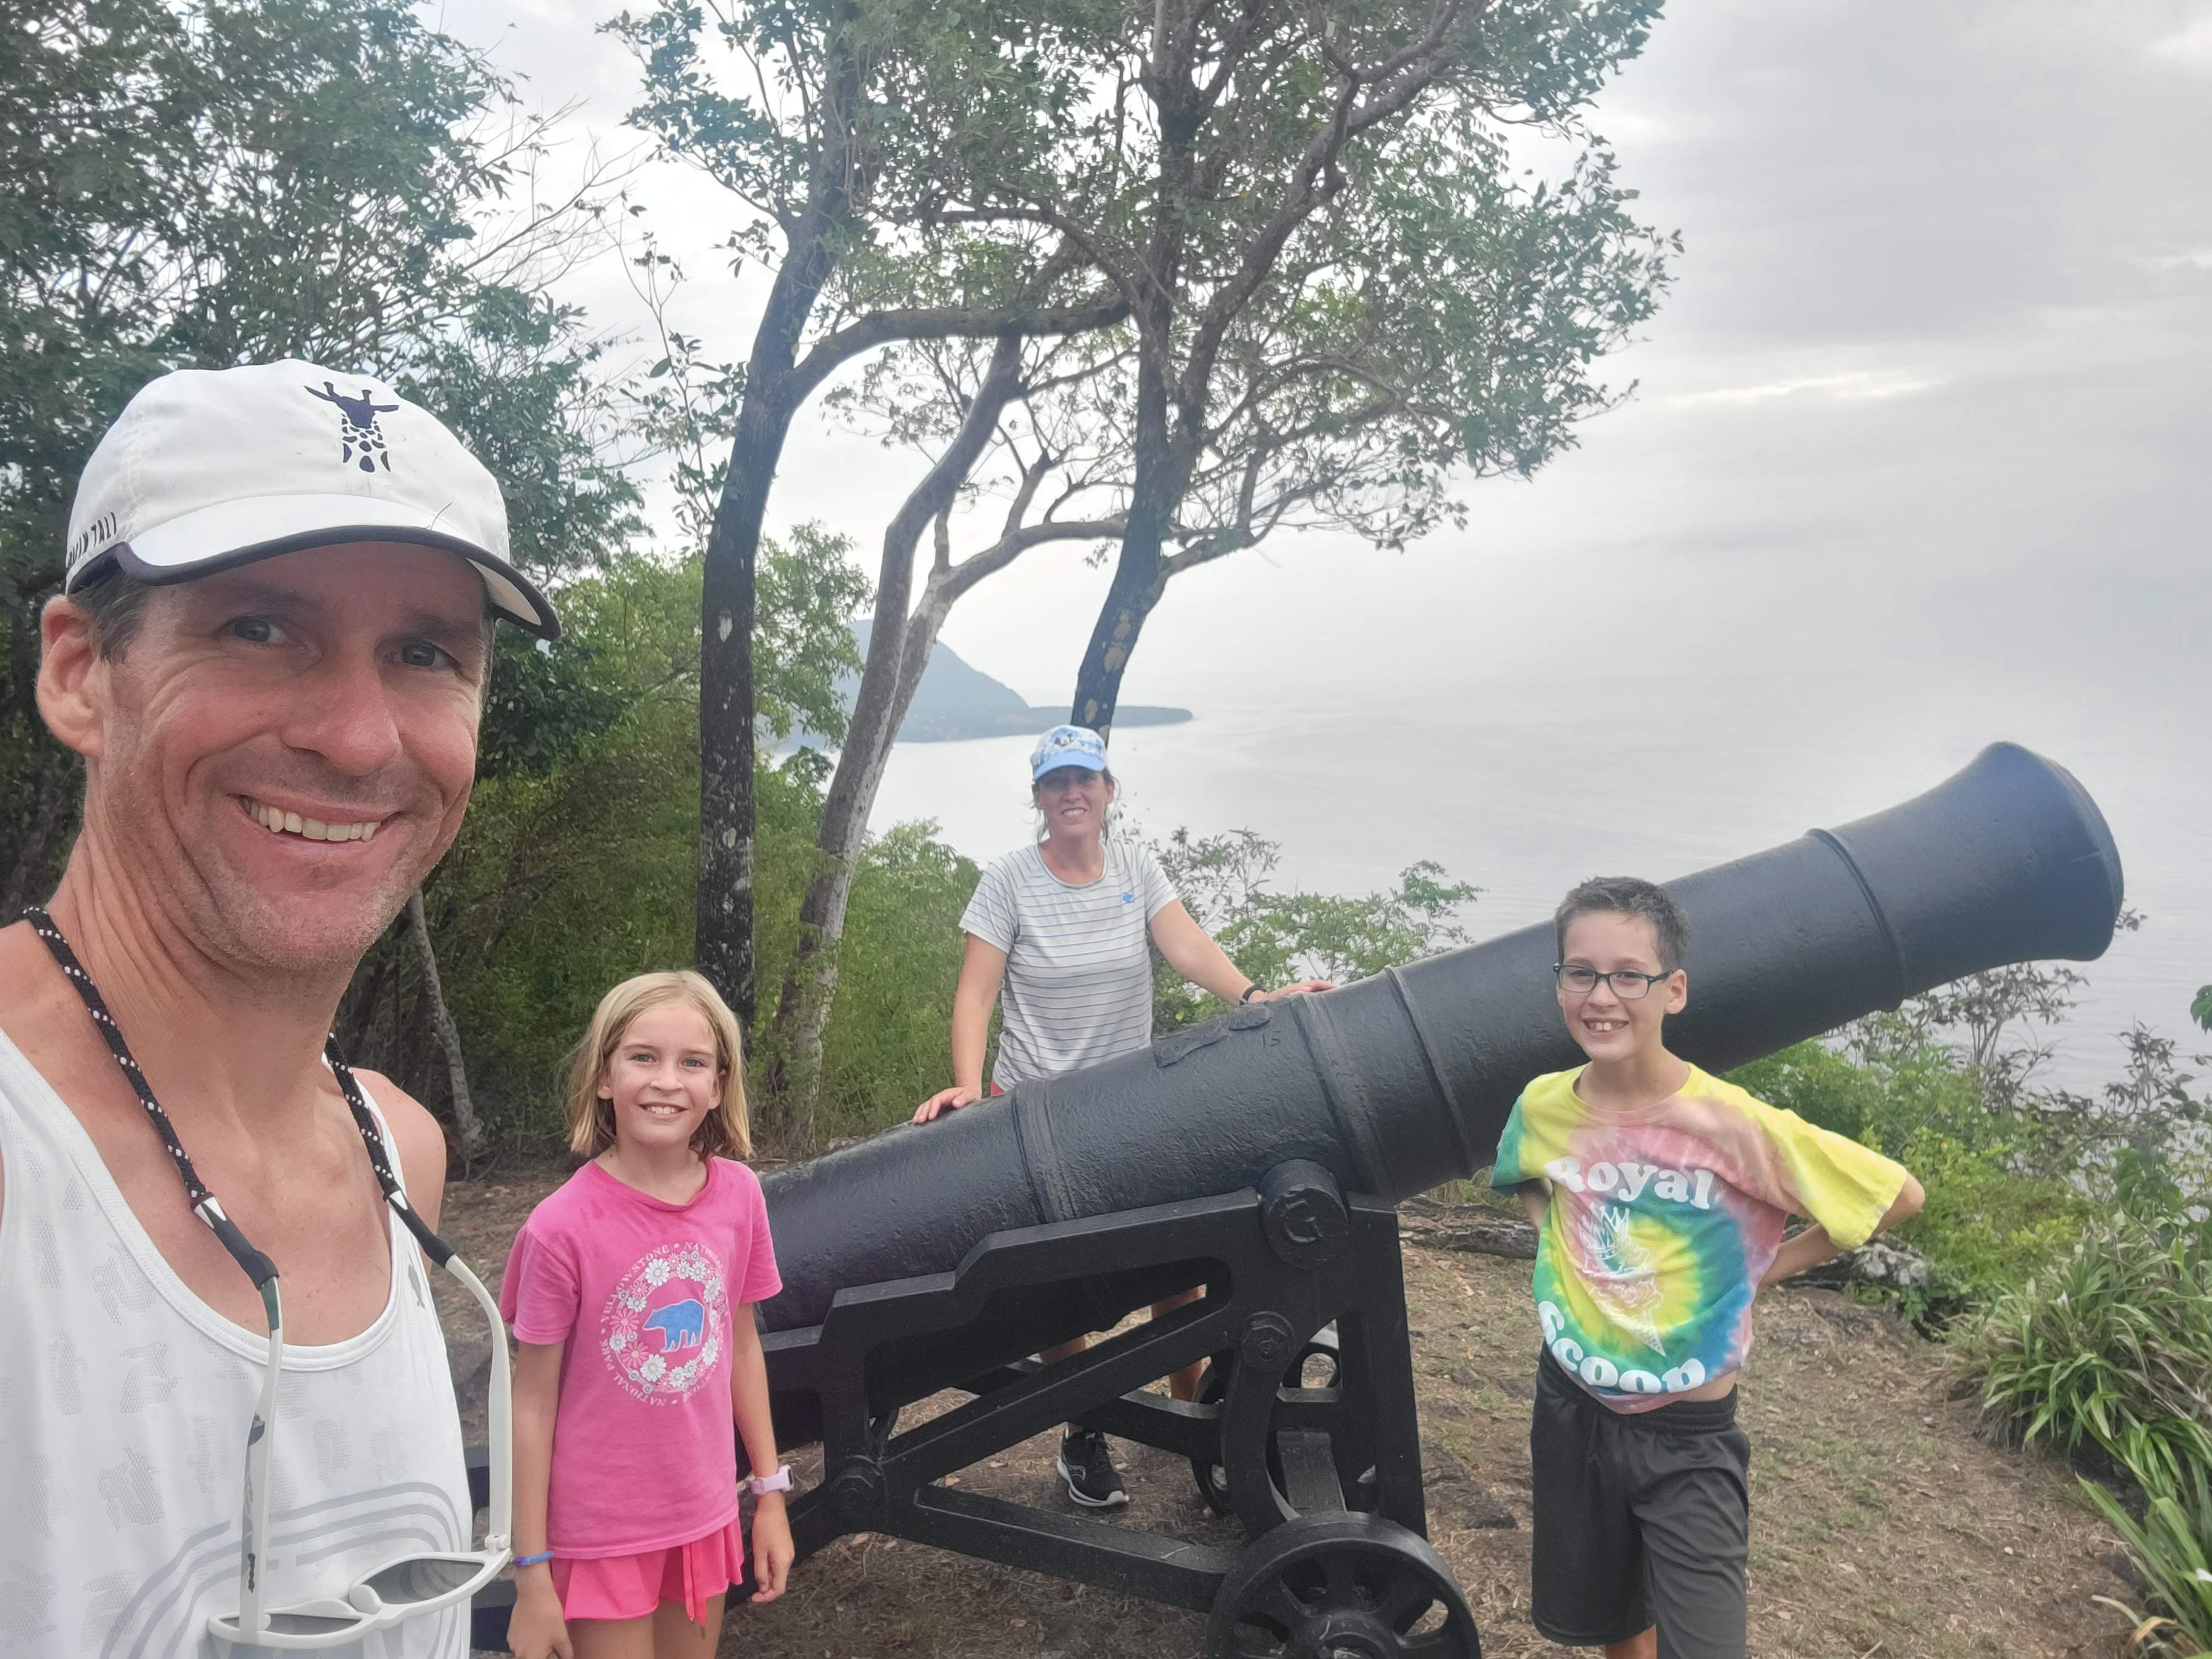 Near A Cannon At Fort Shirley